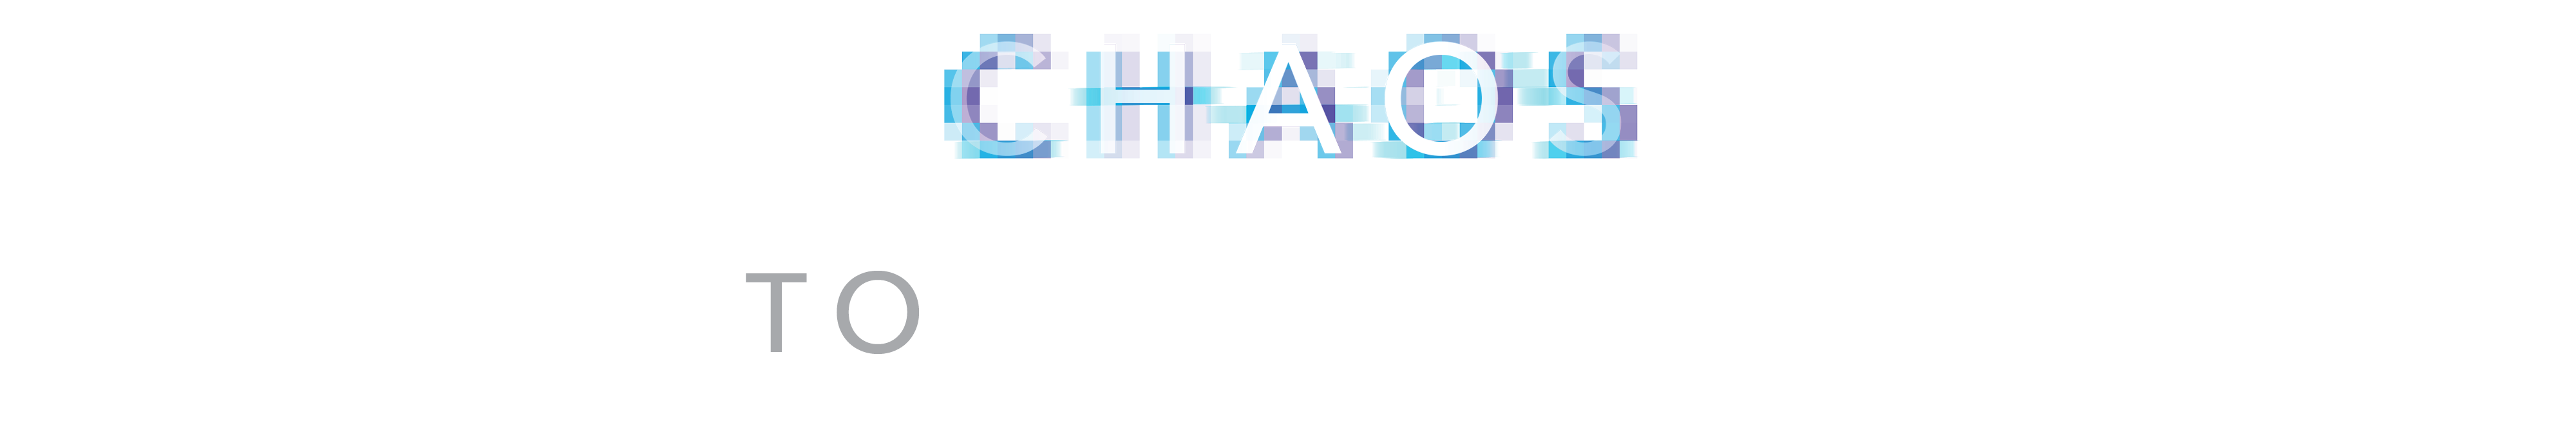 Chaos to Clarity, glitchy text